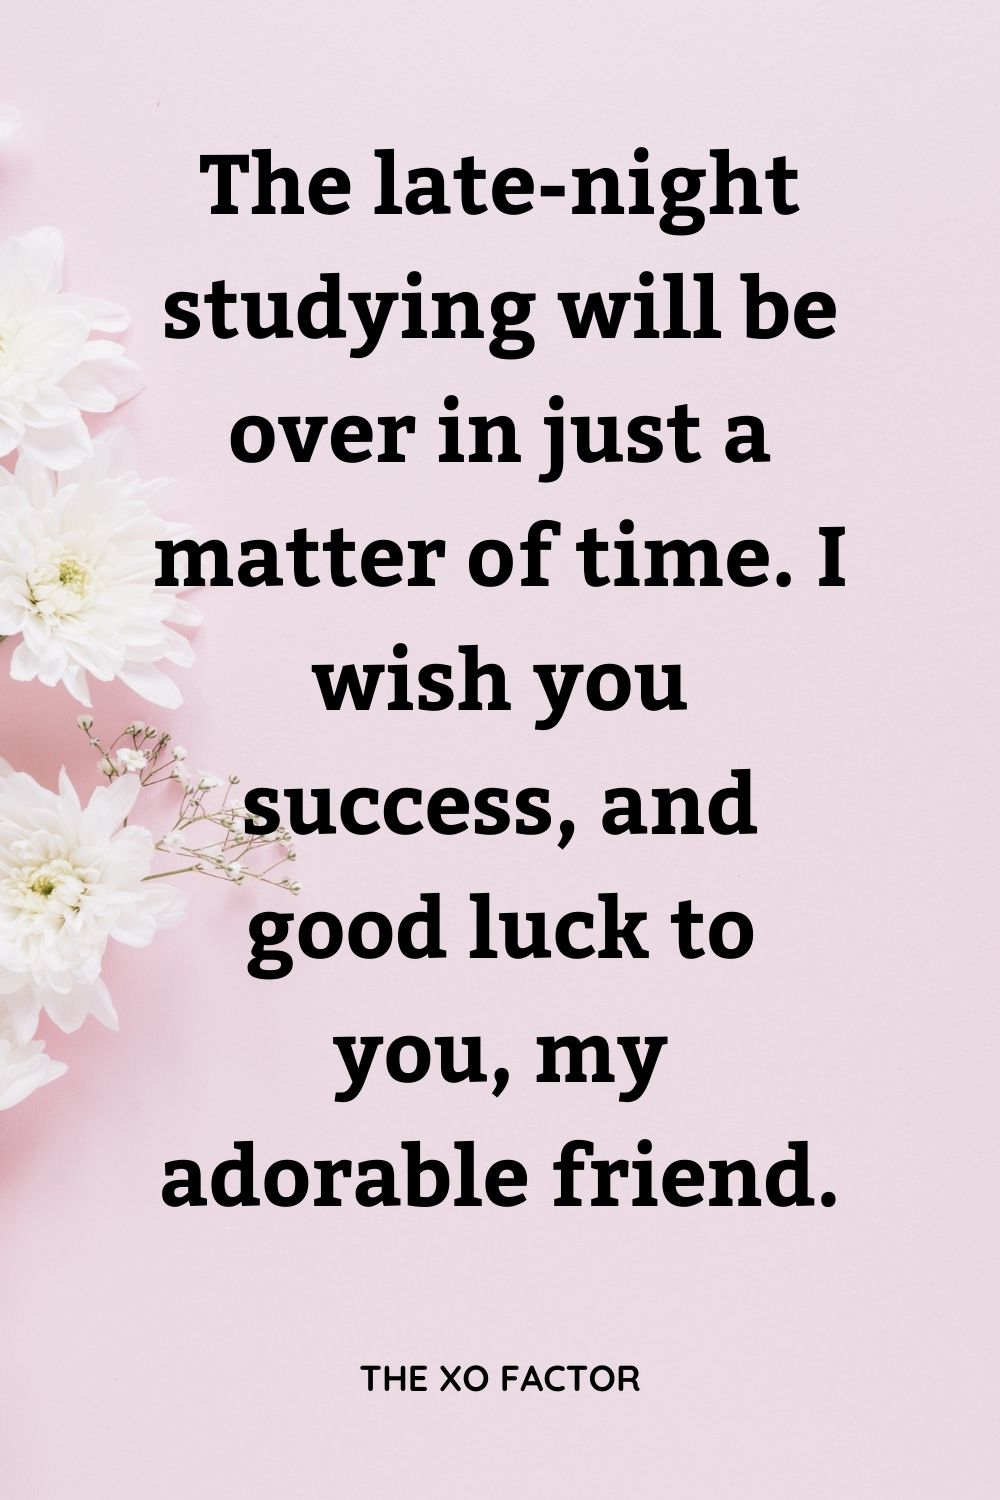 The late-night studying will be over in just a matter of time. I wish you success, and good luck to you, my adorable friend.